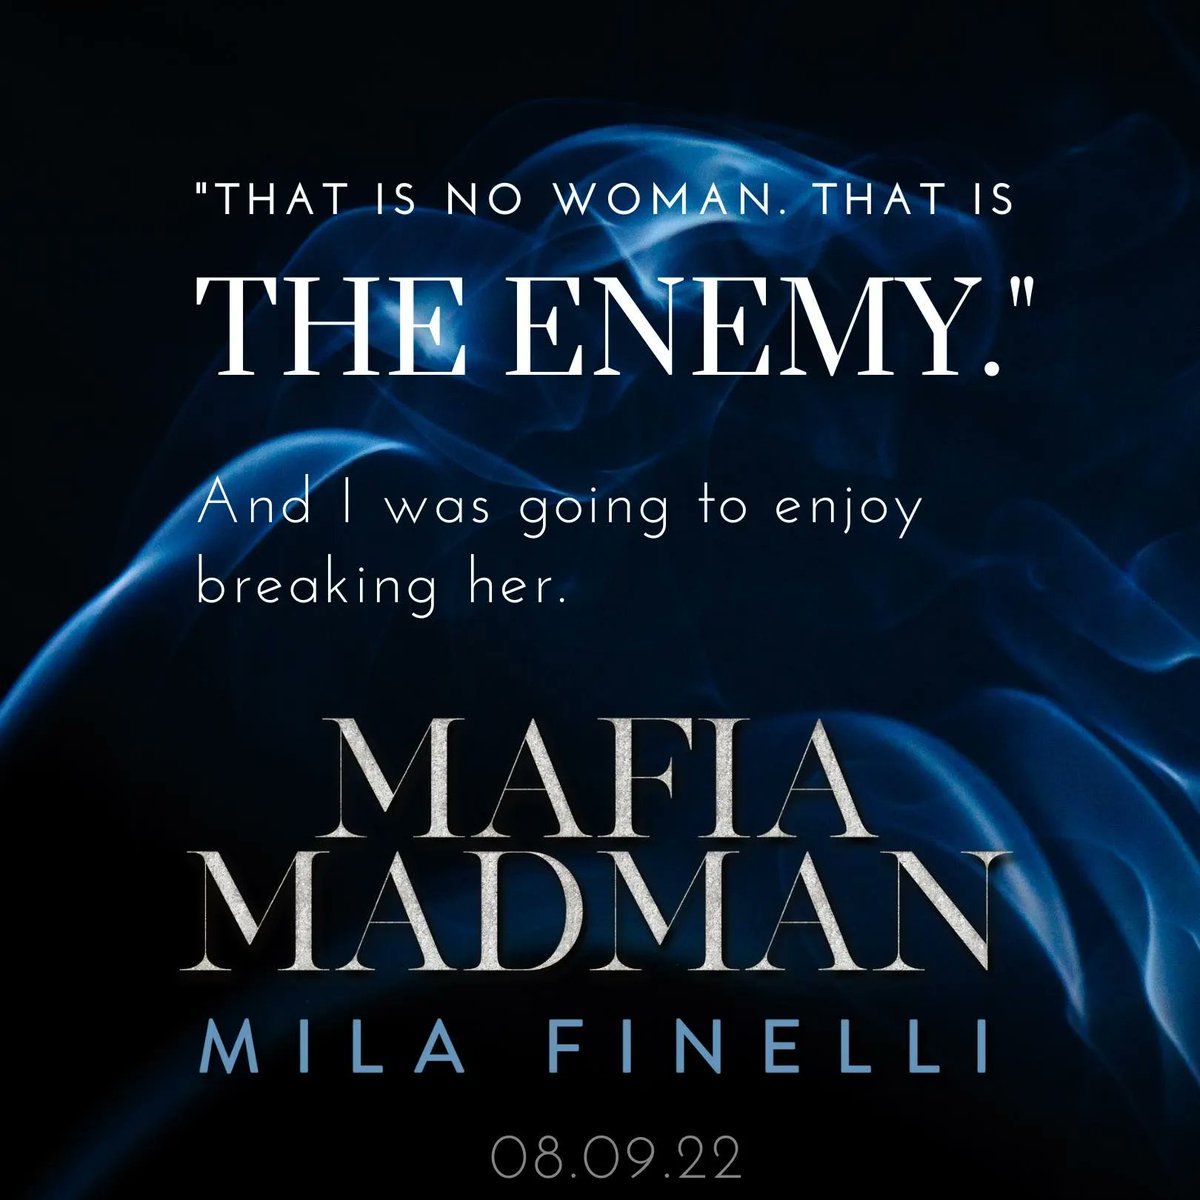 MAFIA MADMAN, the third book in the Kings of Italy series, by Mila Finelli is coming August 9th!! Read an excerpt here: buff.ly/3bqpKV3 Preorder Today! buff.ly/3zNUCbn